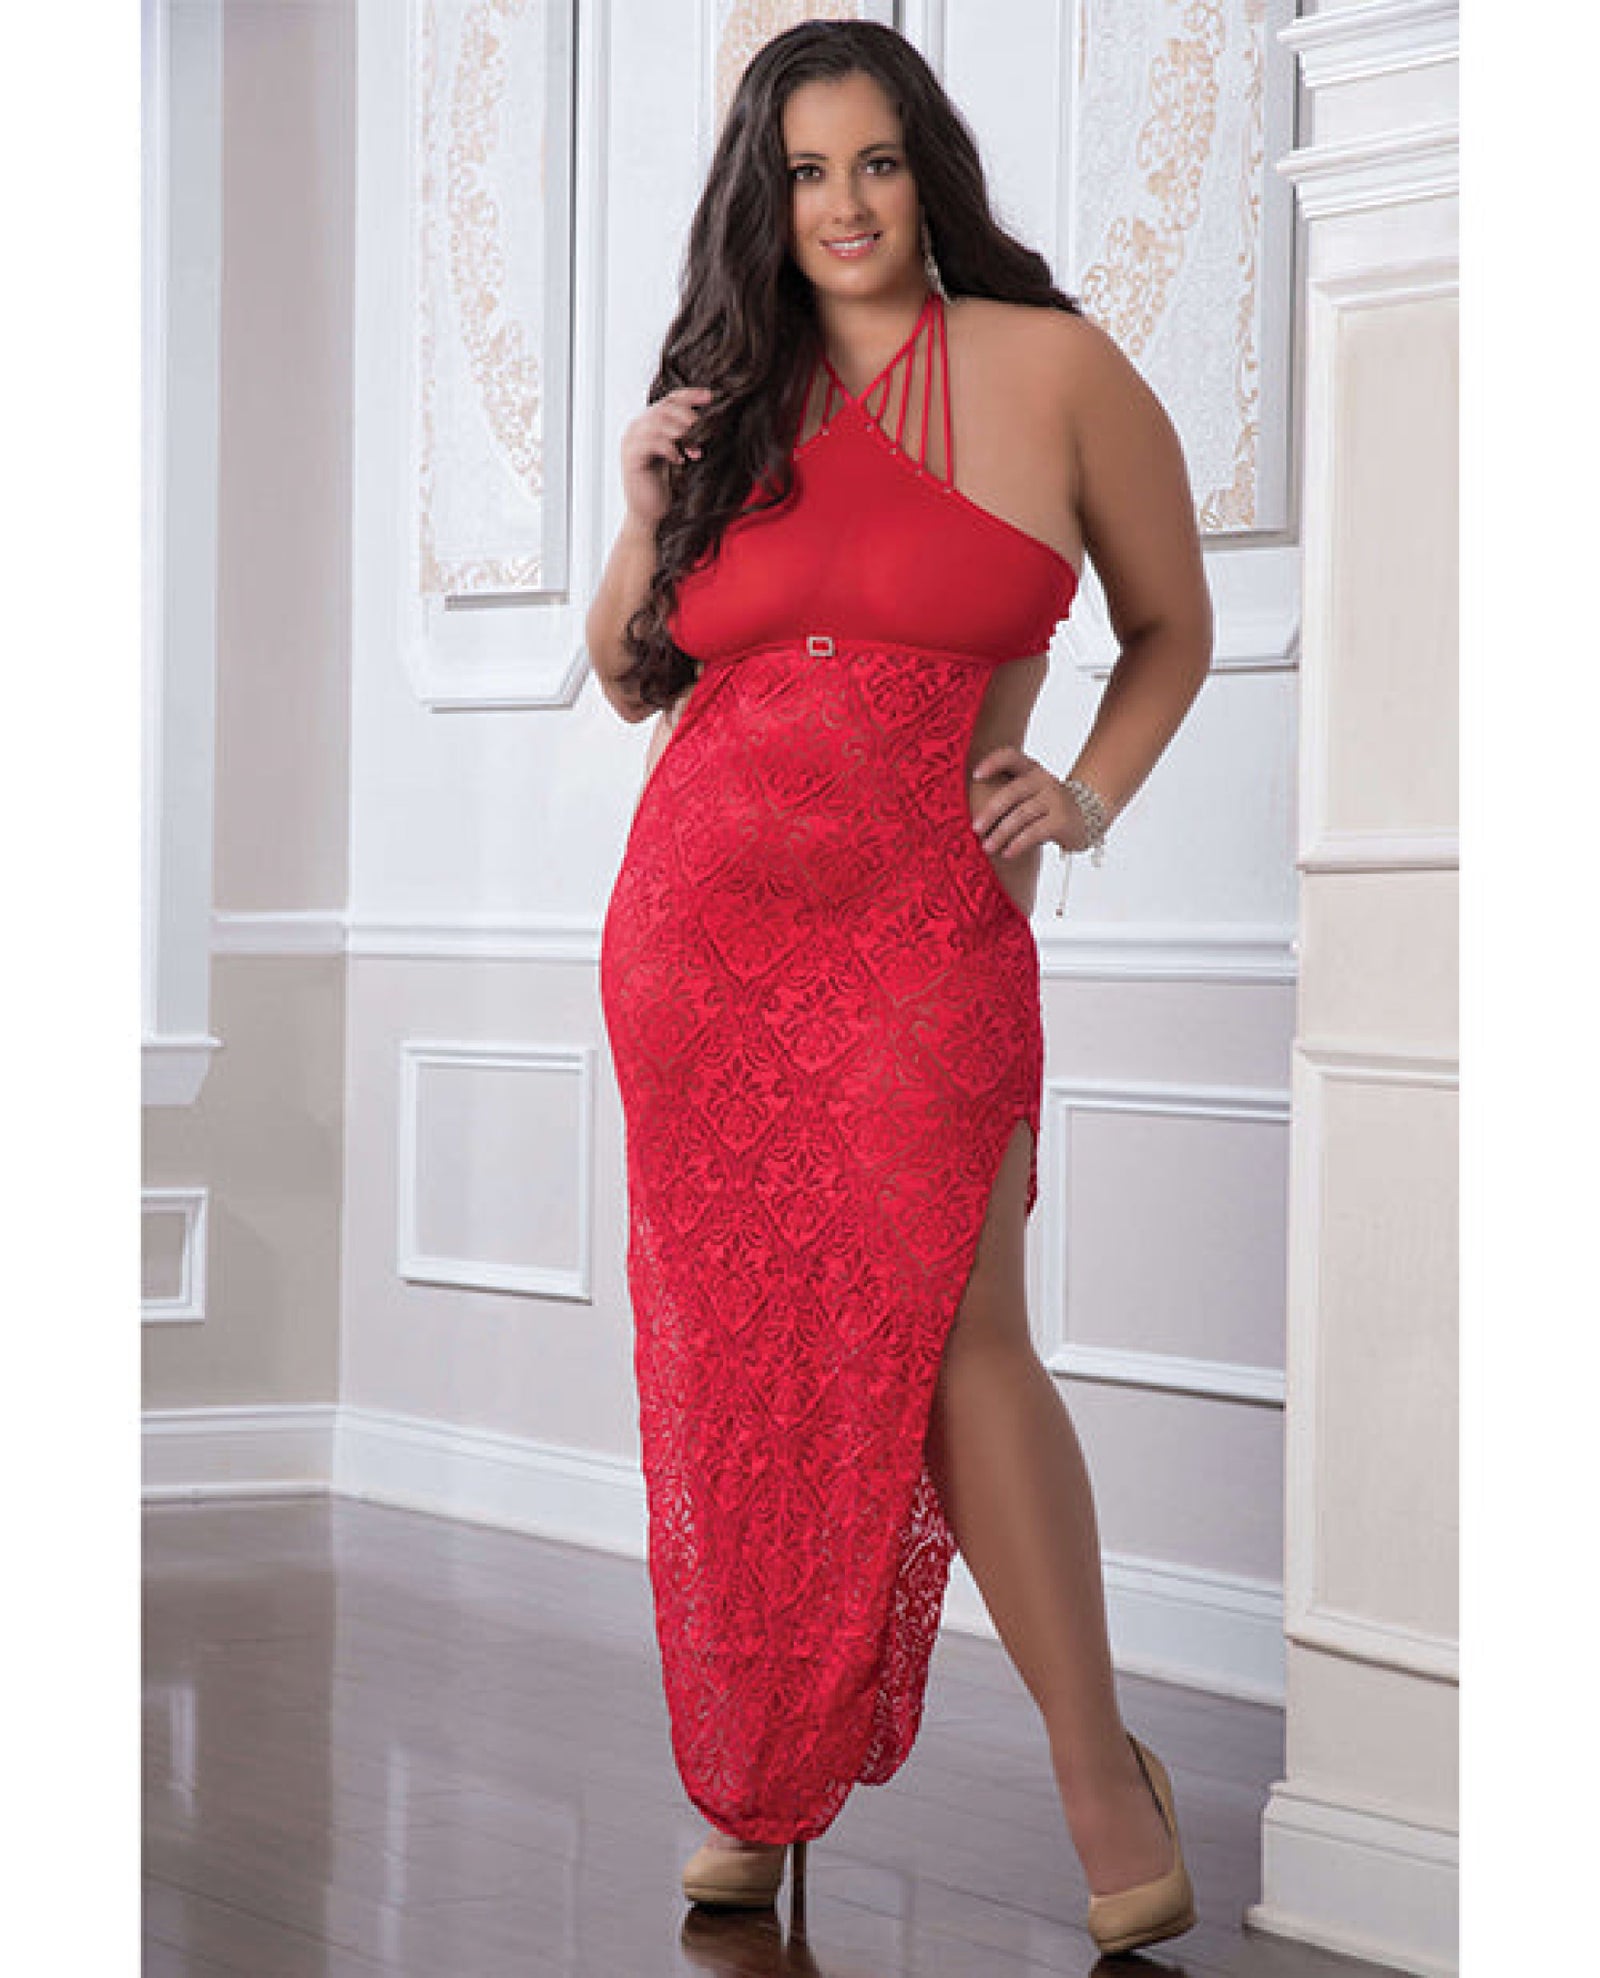 Shoulder Baring Laced Night Dress Red Qn G World Intimates